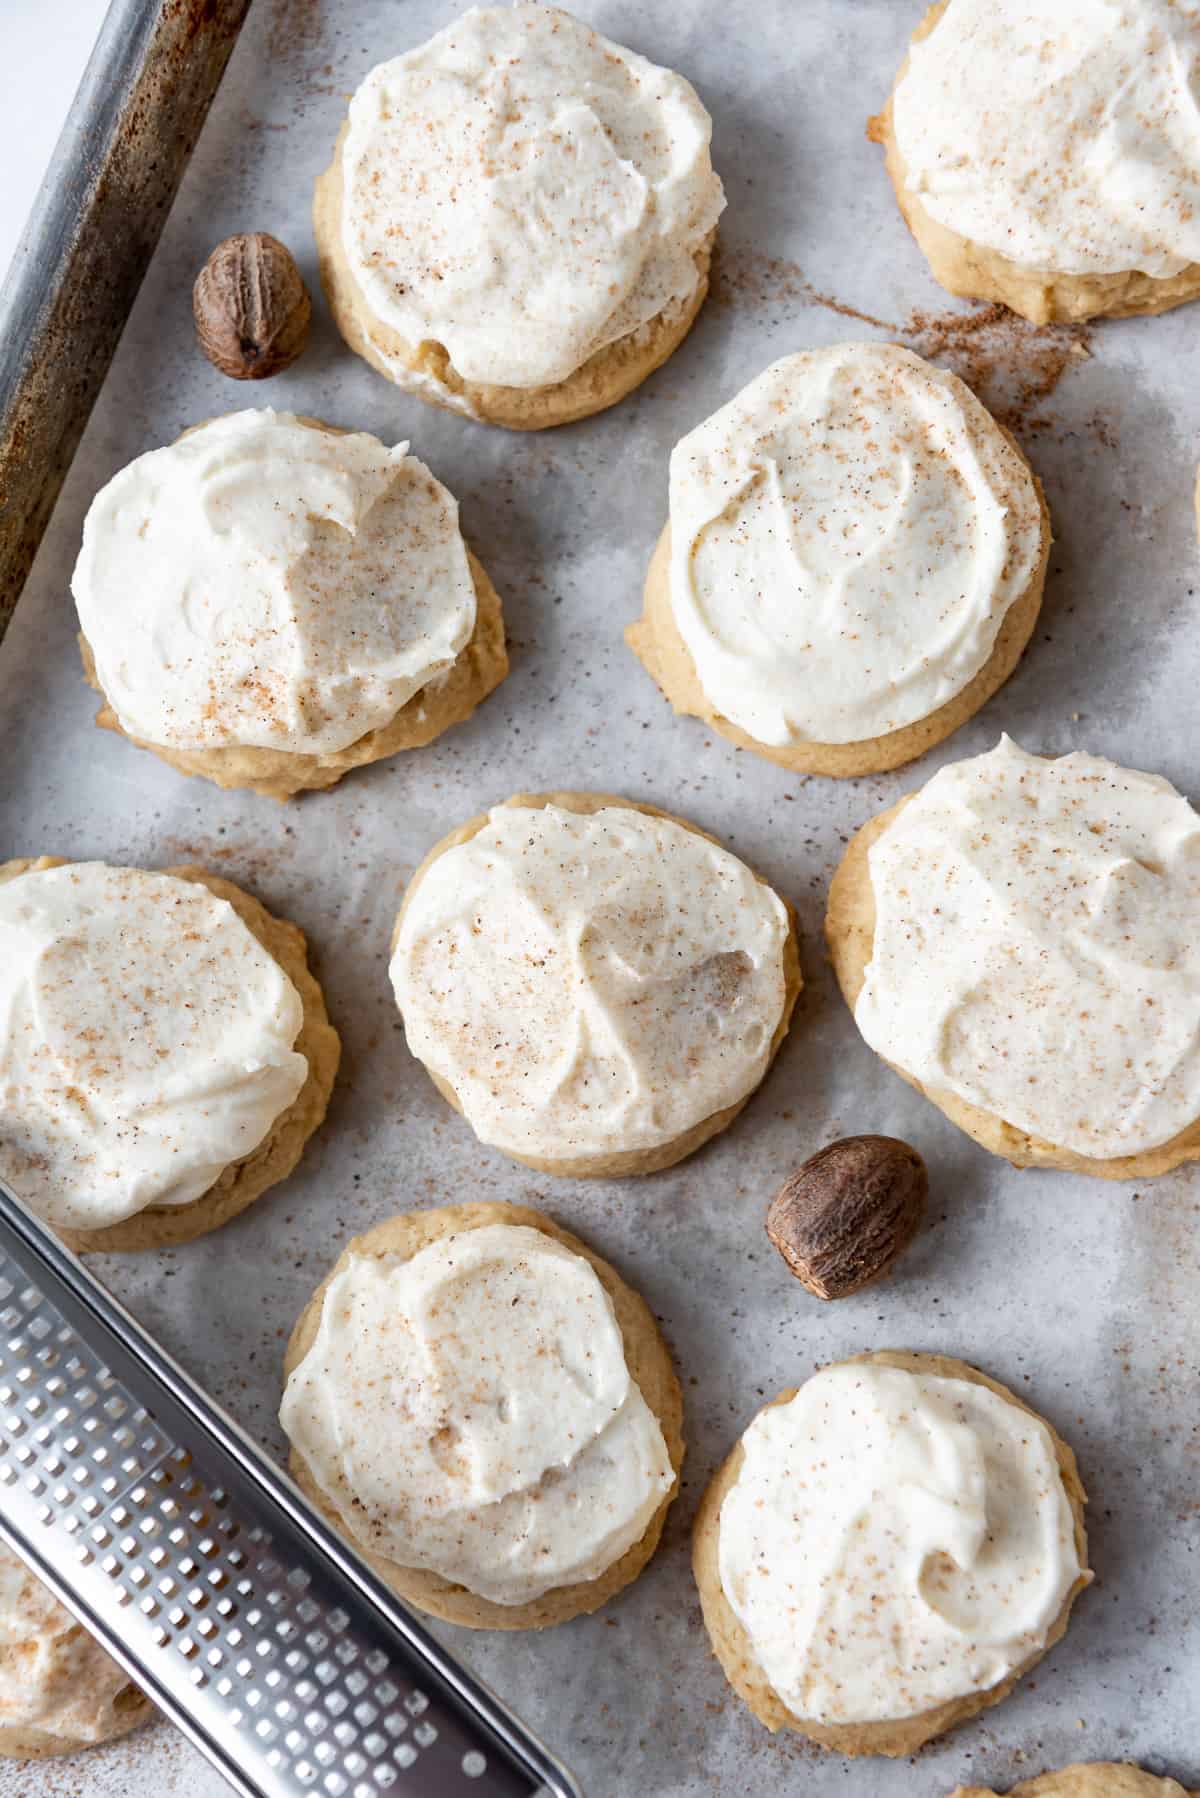 An overhead image of frosted eggnog cookies dusted with freshly grated nutmeg.